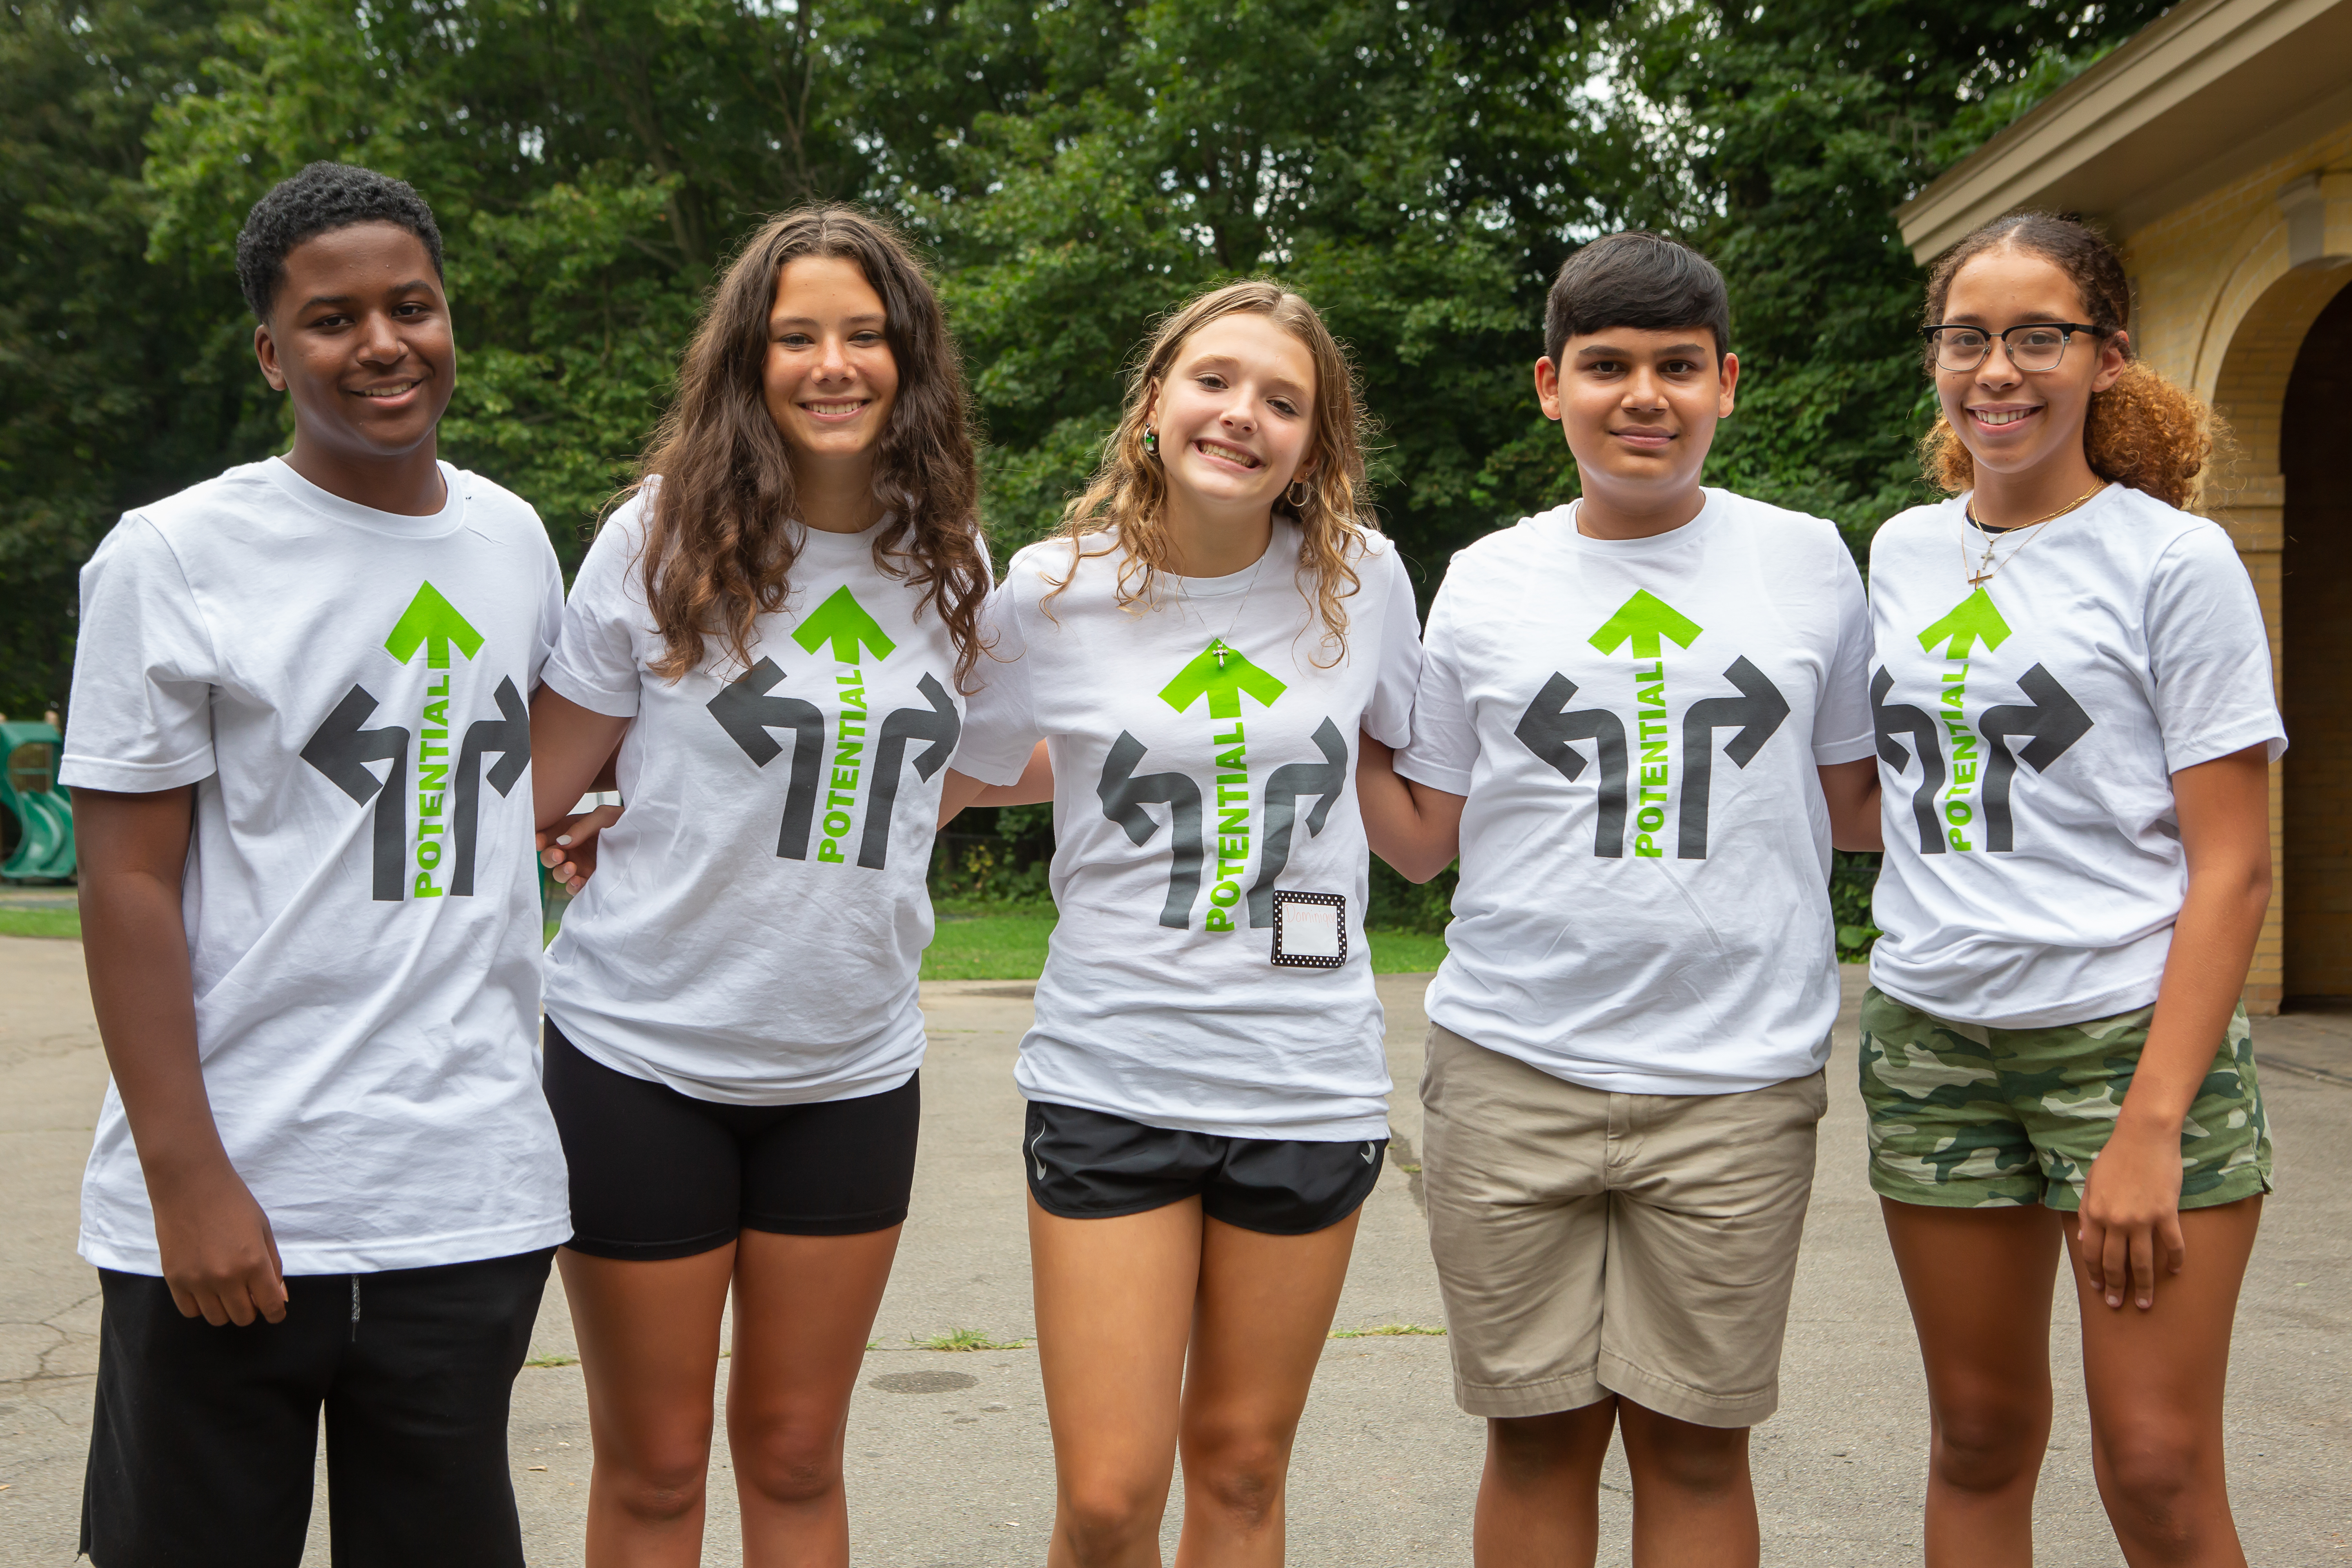 Students standing together with Crossroads t-shirts on